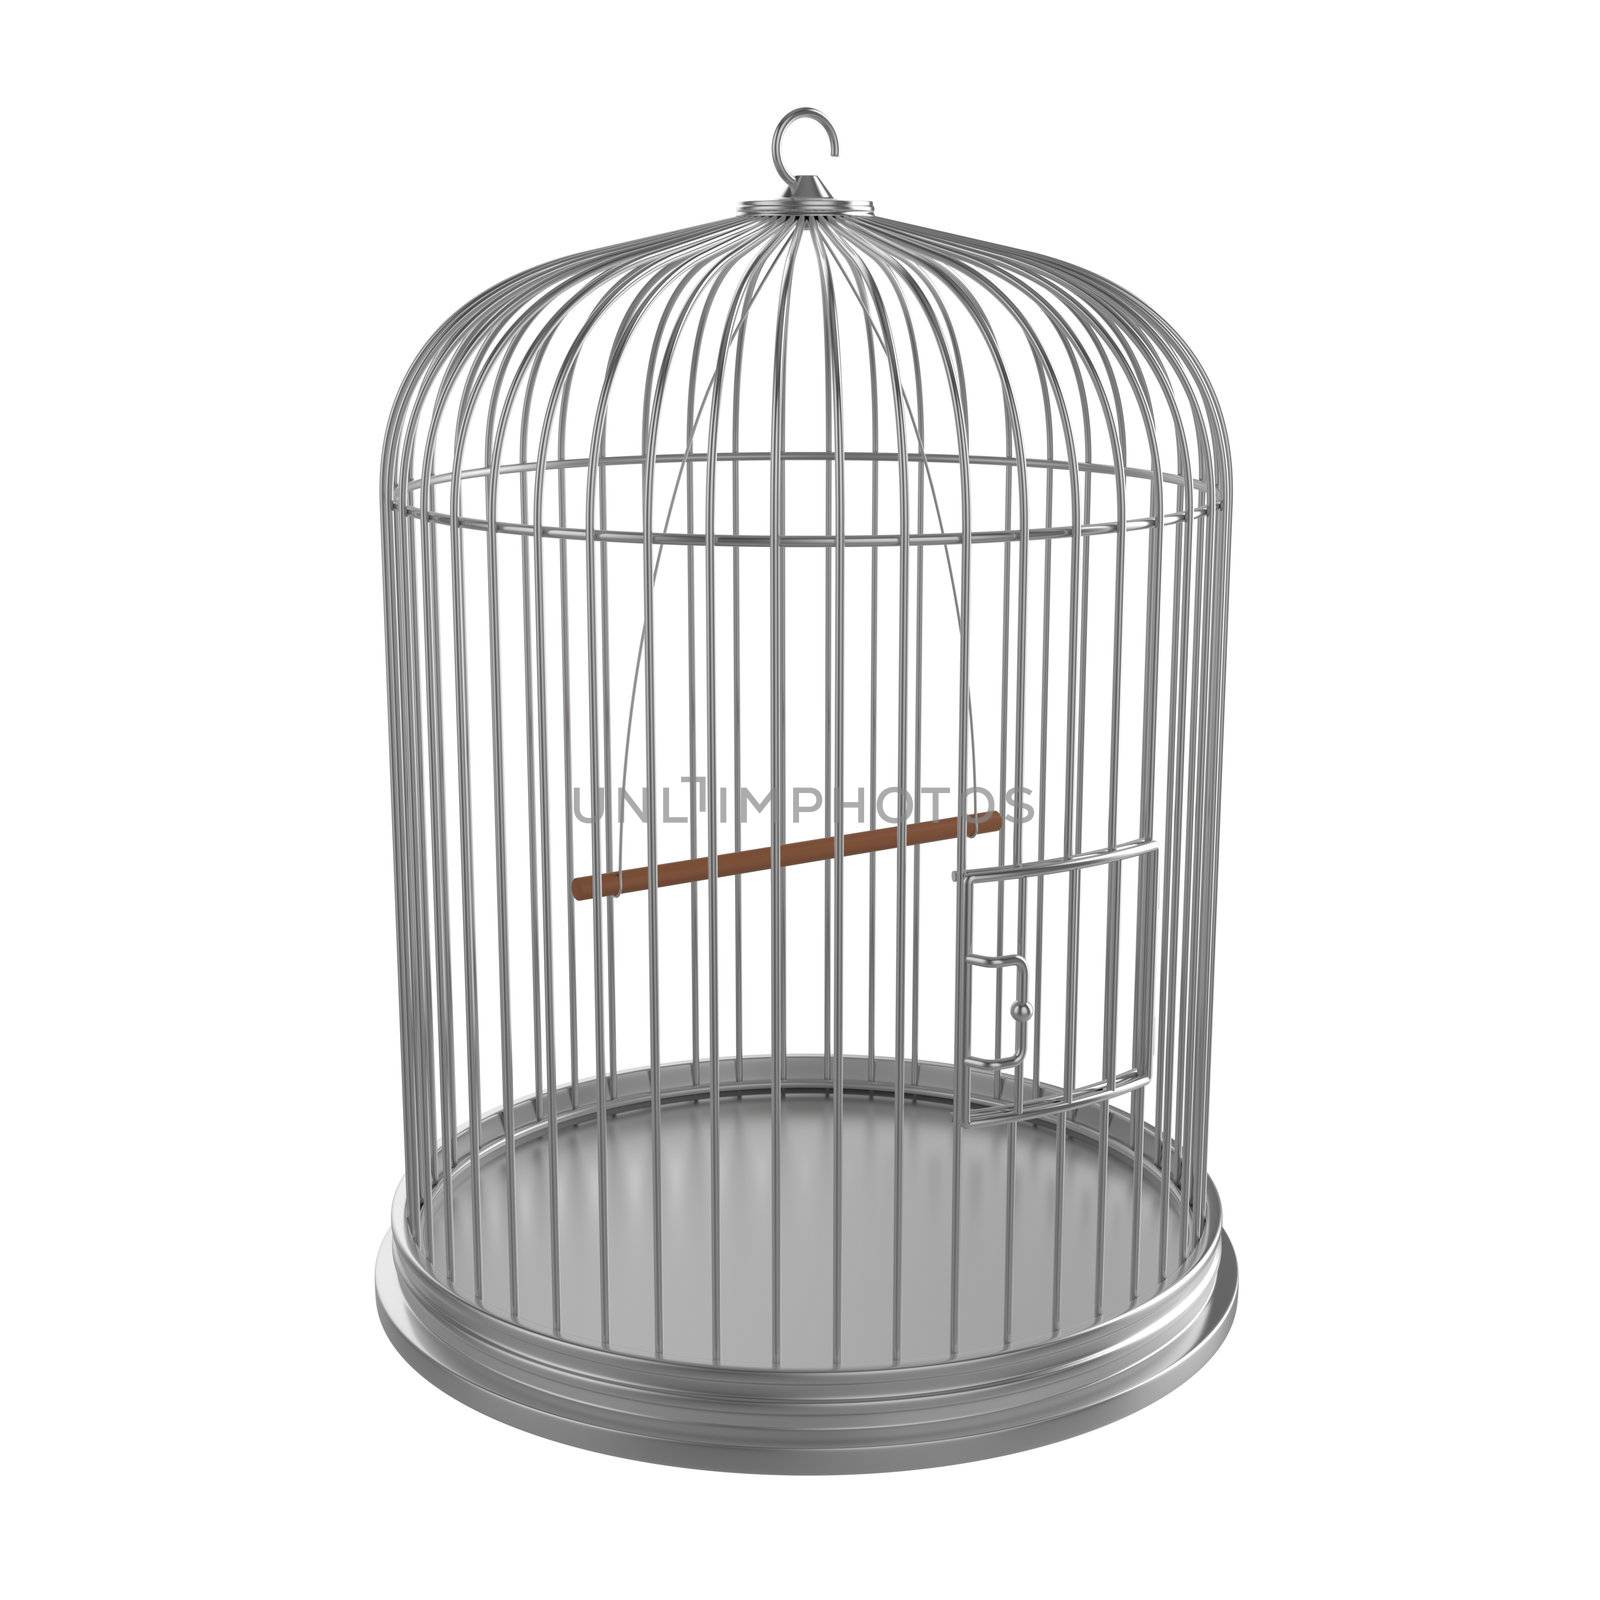 Silver bird cage by magraphics